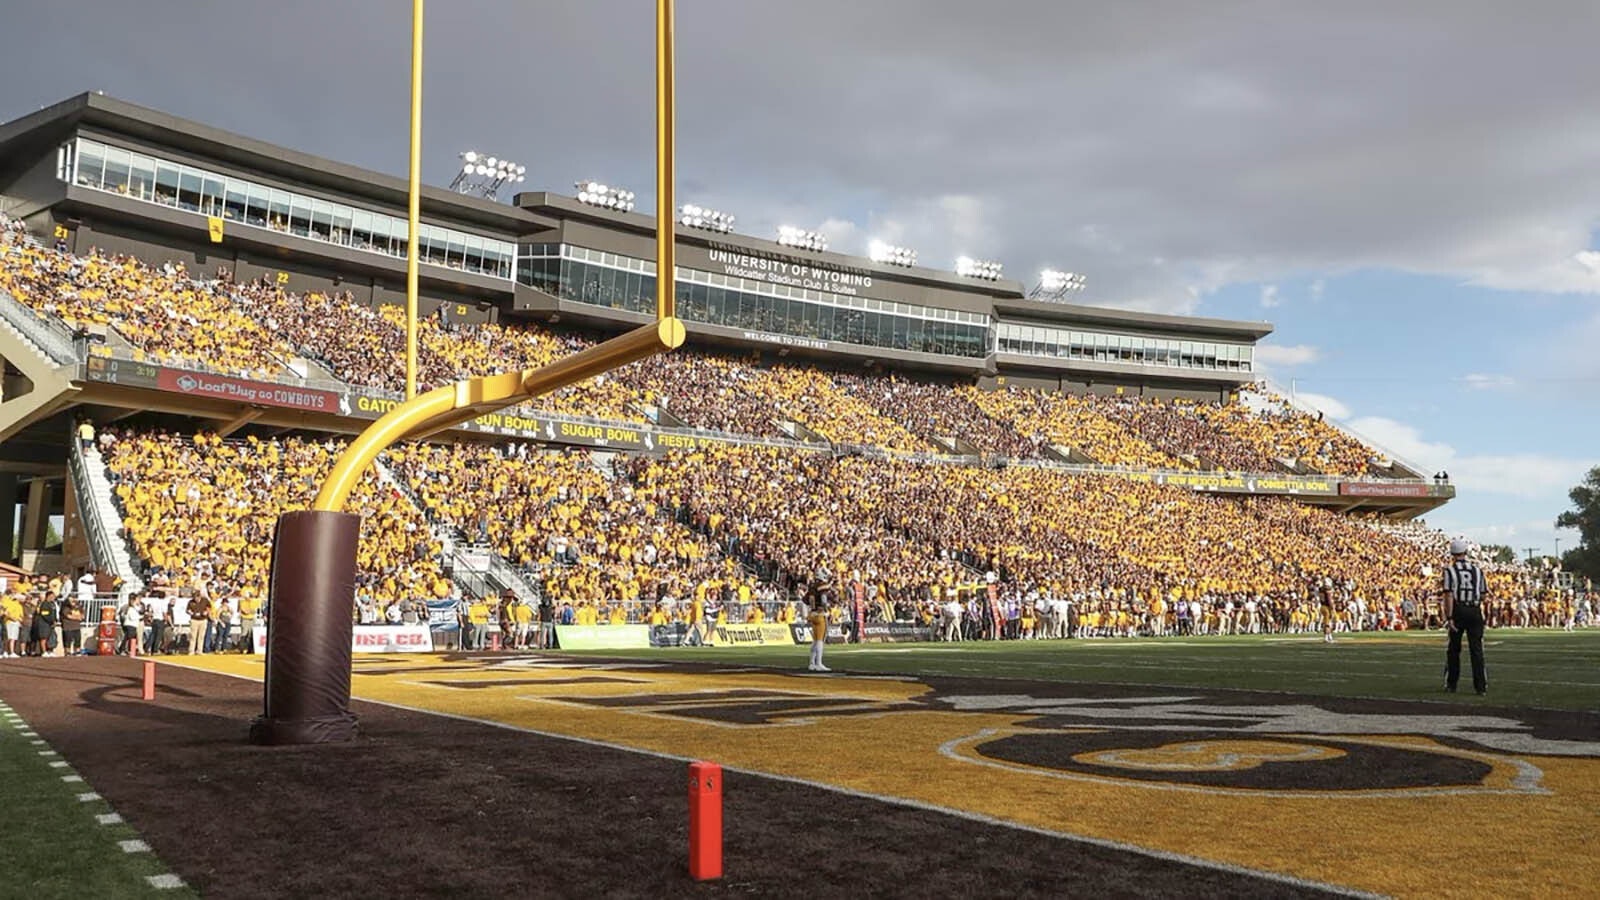 A sellout crowd for a 2019 football game between the Wyoming Cowboys and the Missouri Tigers at War Memorial Stadium in Laramie in this file photo. The Cowboys beat the Tigers 37-31.